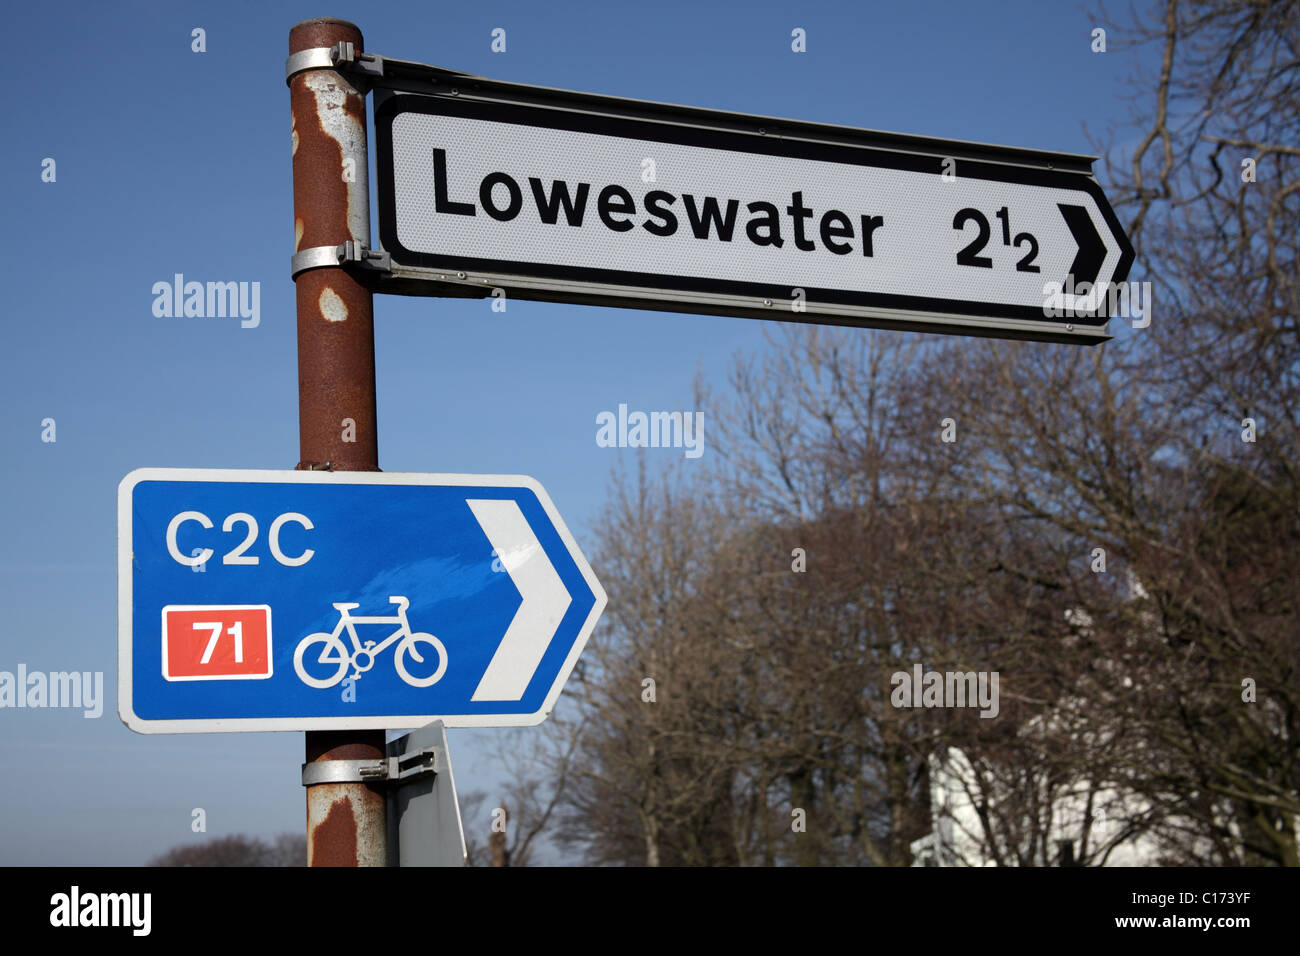 Direction sign on National Cycle Trail 71; Coast to Coast route, Loweswater, Cumbria, England Stock Photo